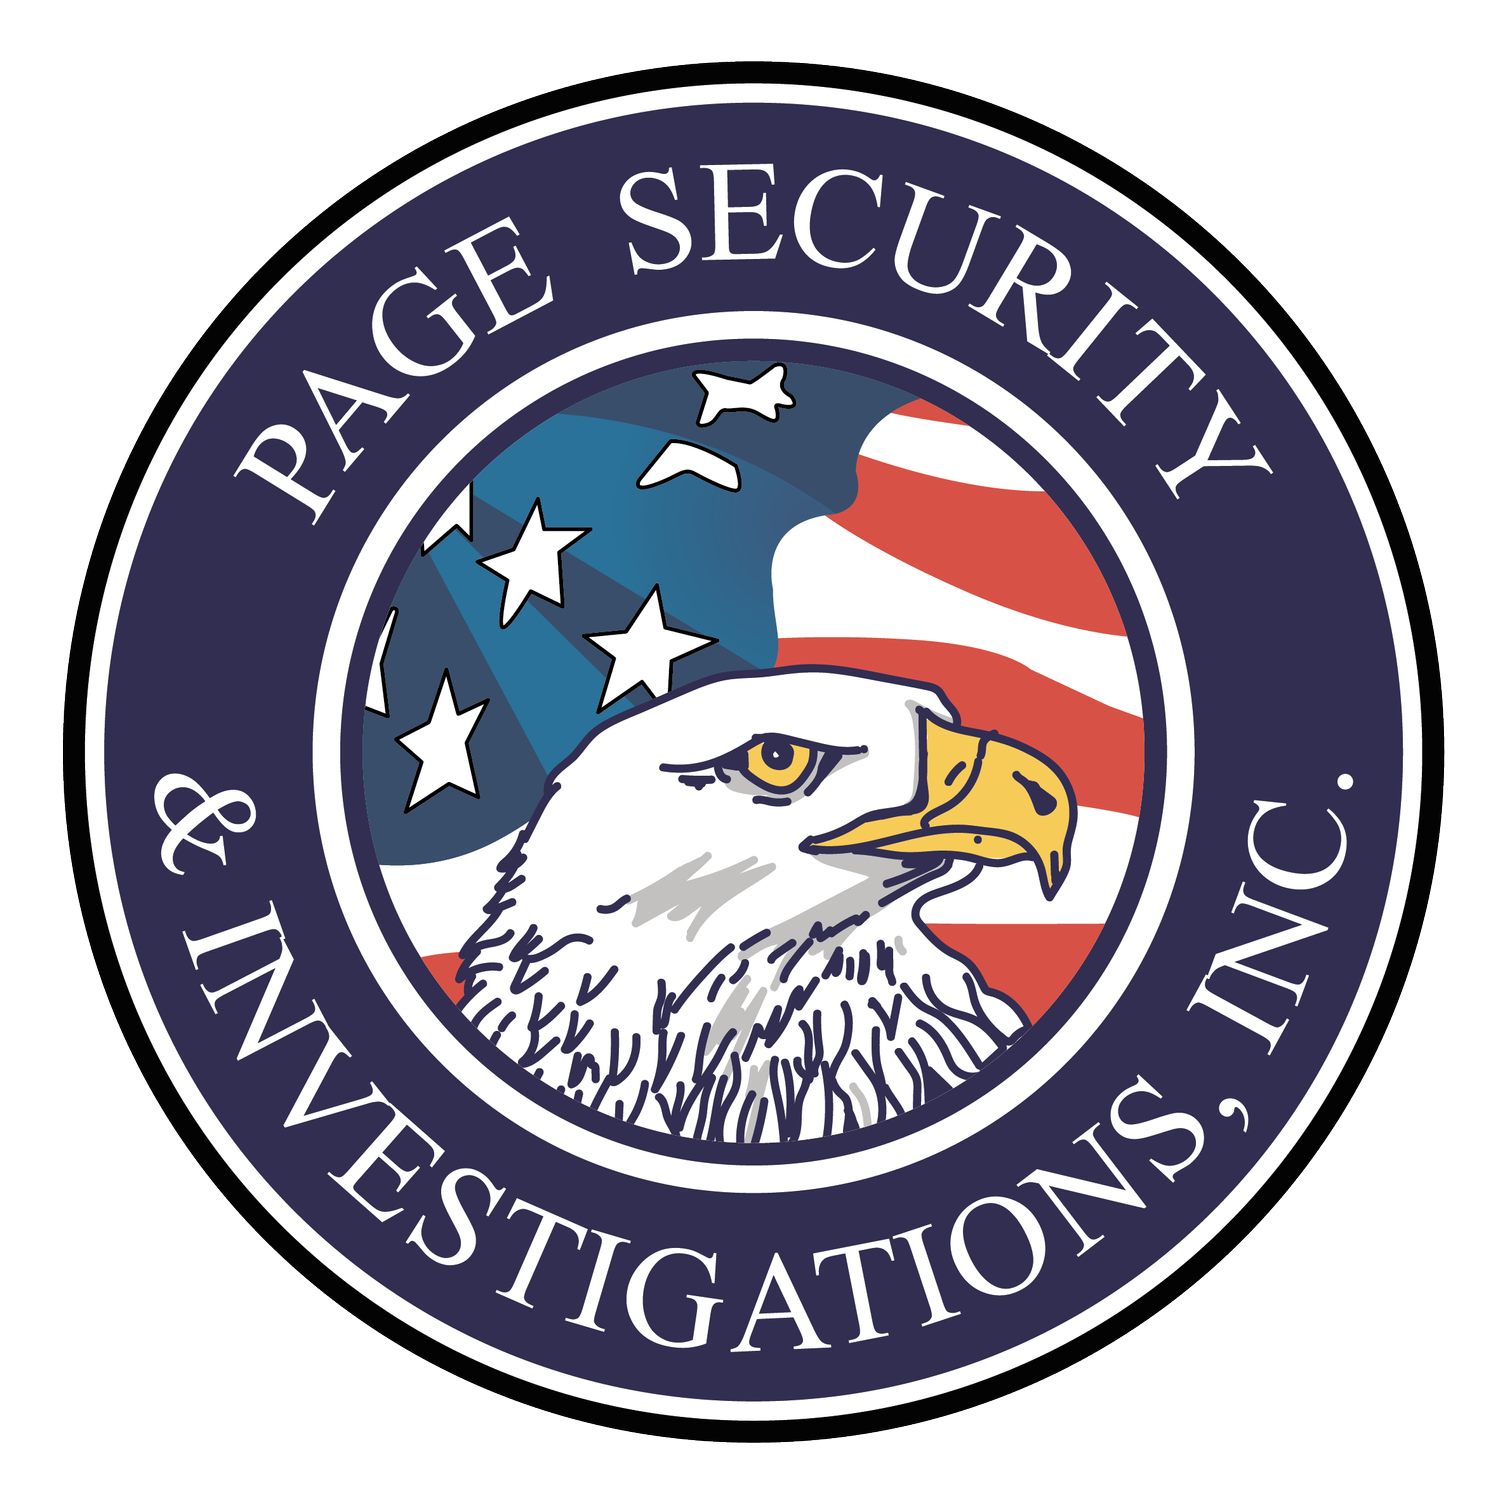 Page Security &amp; Investigation Services, Inc. | Trusted Security Officers | Investigations